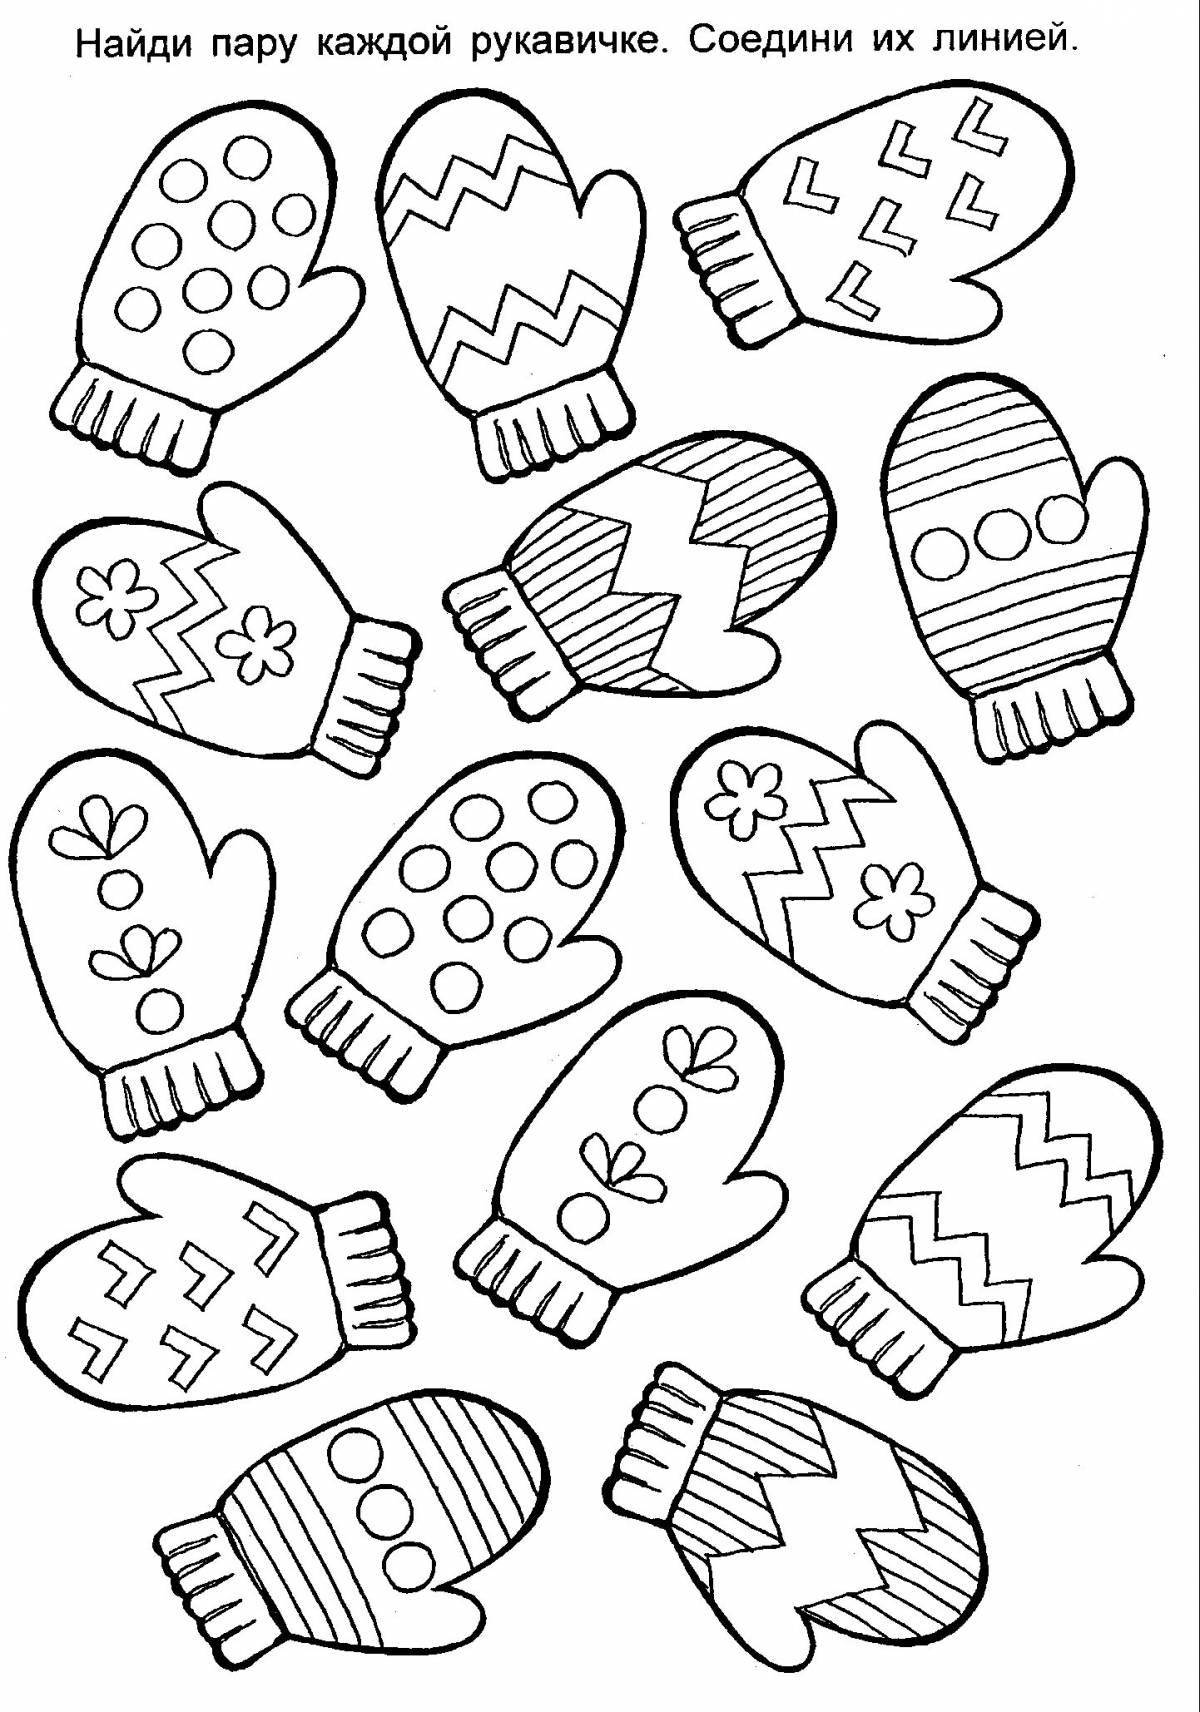 Animated coloring book of mittens for kids